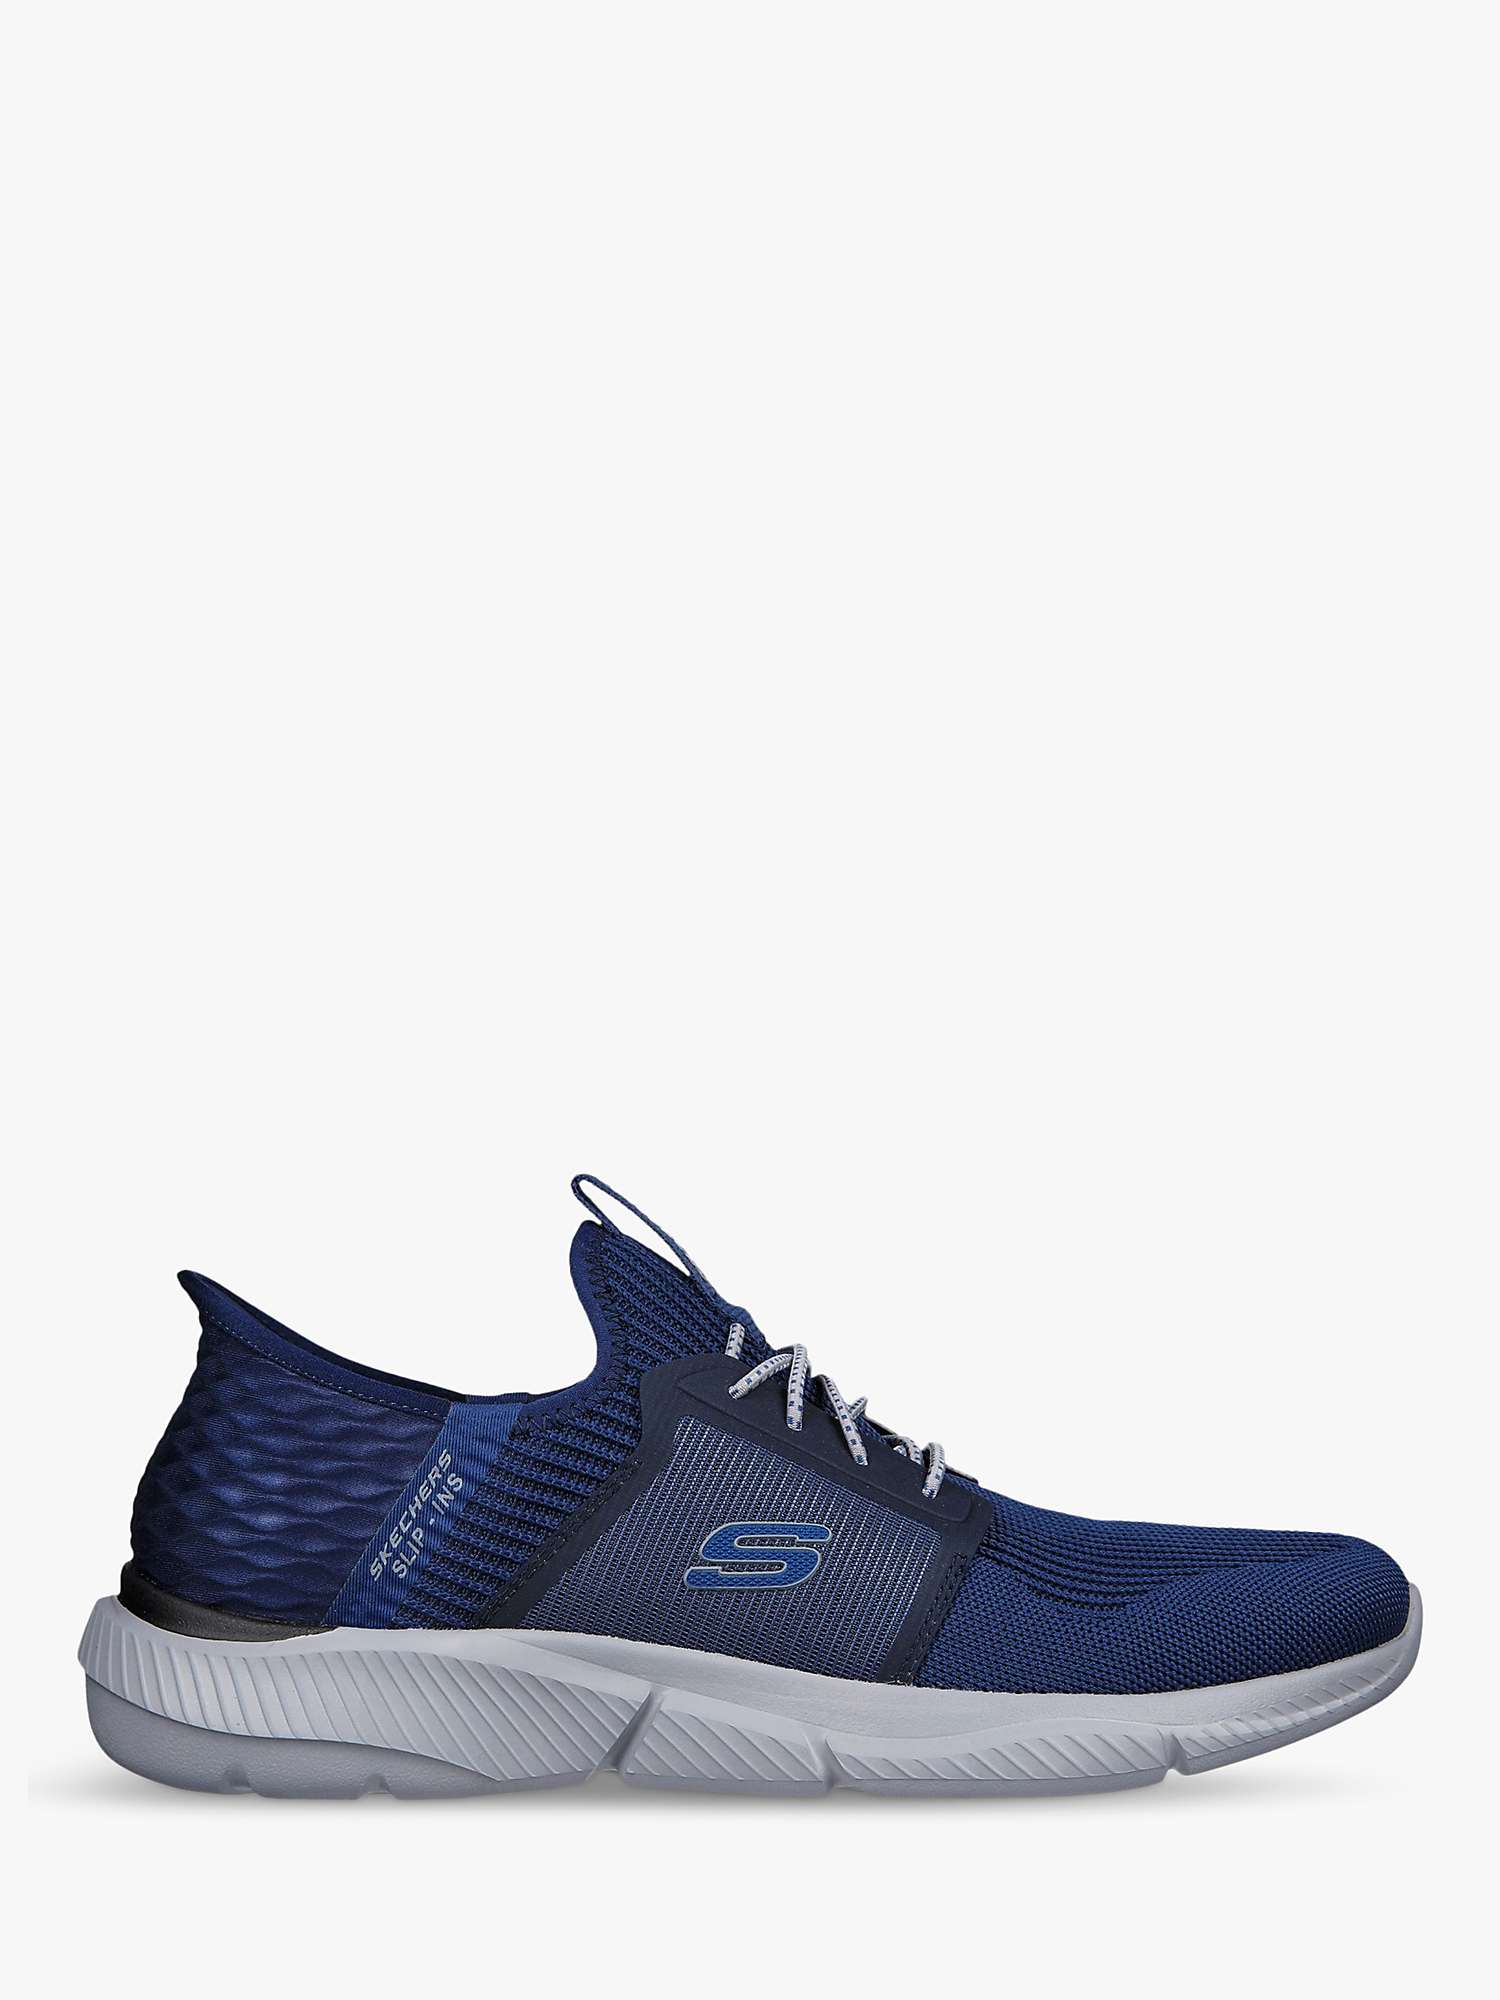 Buy Skechers Ingram Brackette Hands-Free Slip-Ins Relaxed Fit Trainers Online at johnlewis.com